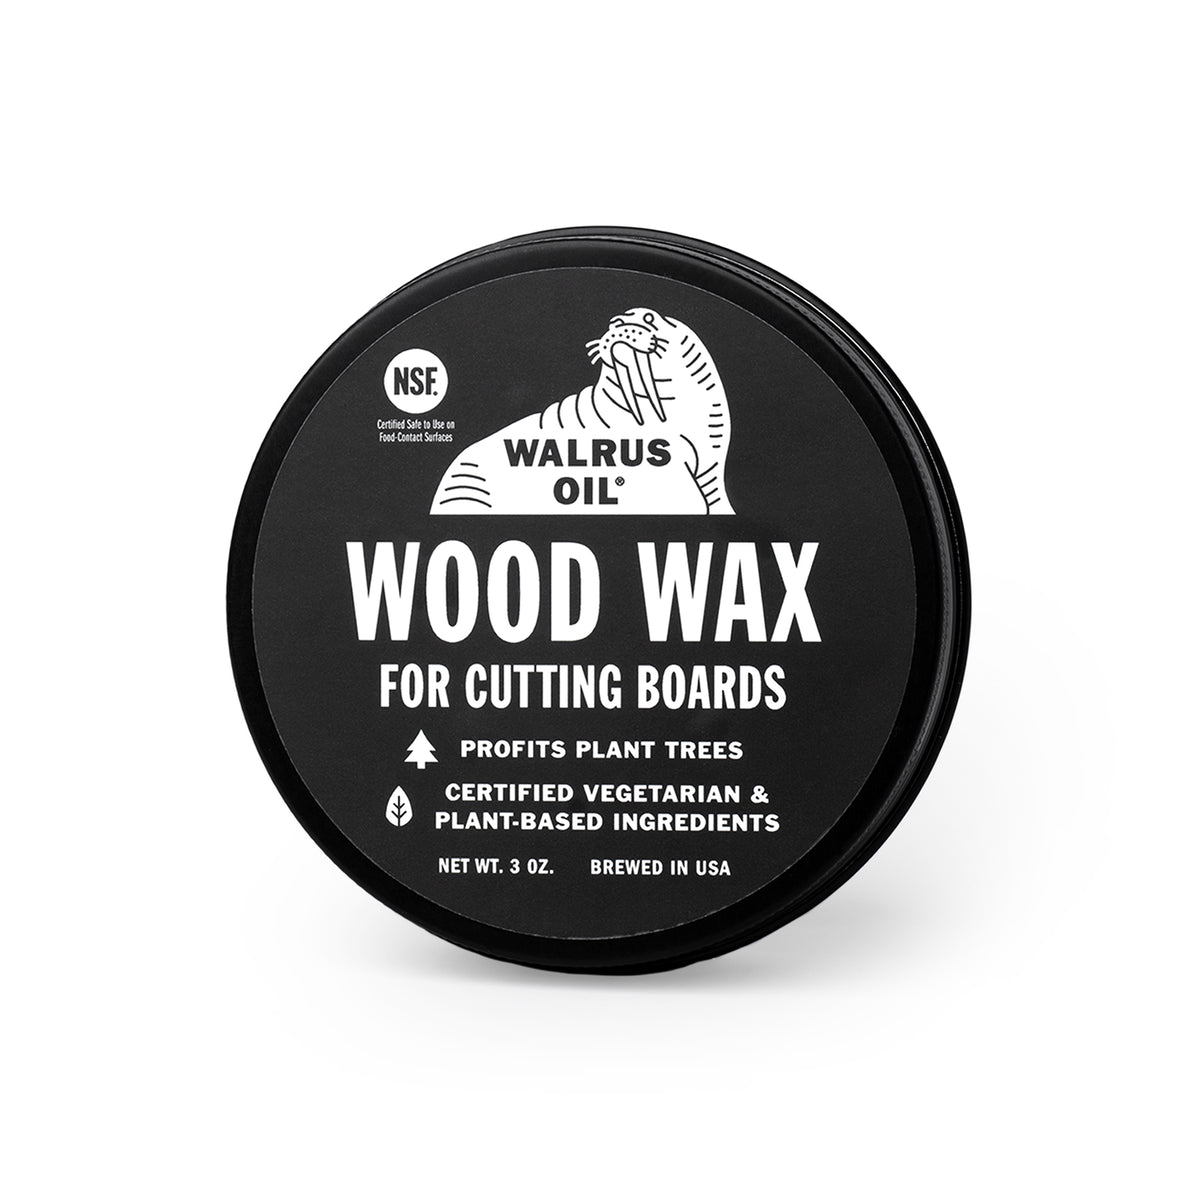 Which Is Best: Wax, Polish or Oil?